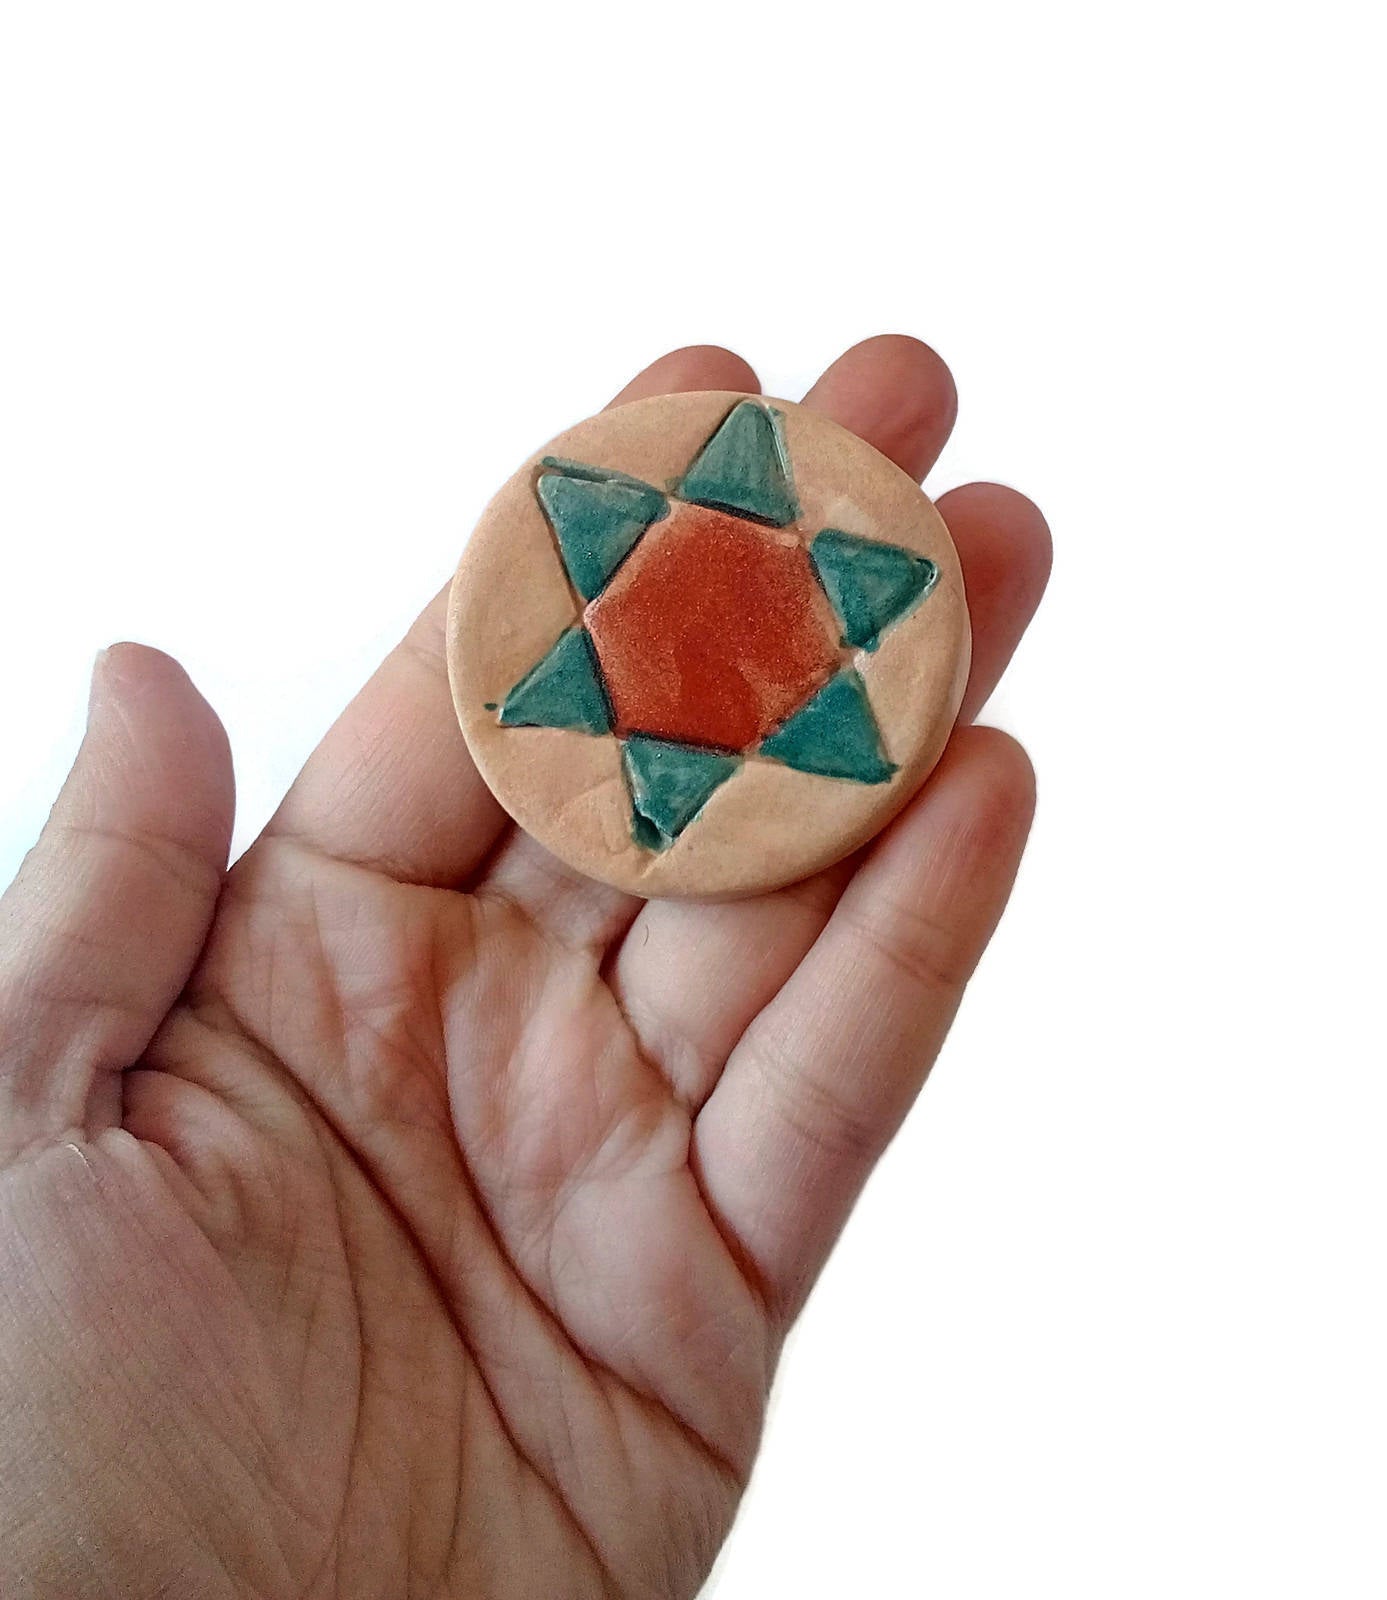 Handmade Ceramic Star Brooch For Women Clothing, Hand Painted Mothers Day Gift From Daughter, Best Sellers Mom Birthday Gift, Broach Pin - Ceramica Ana Rafael